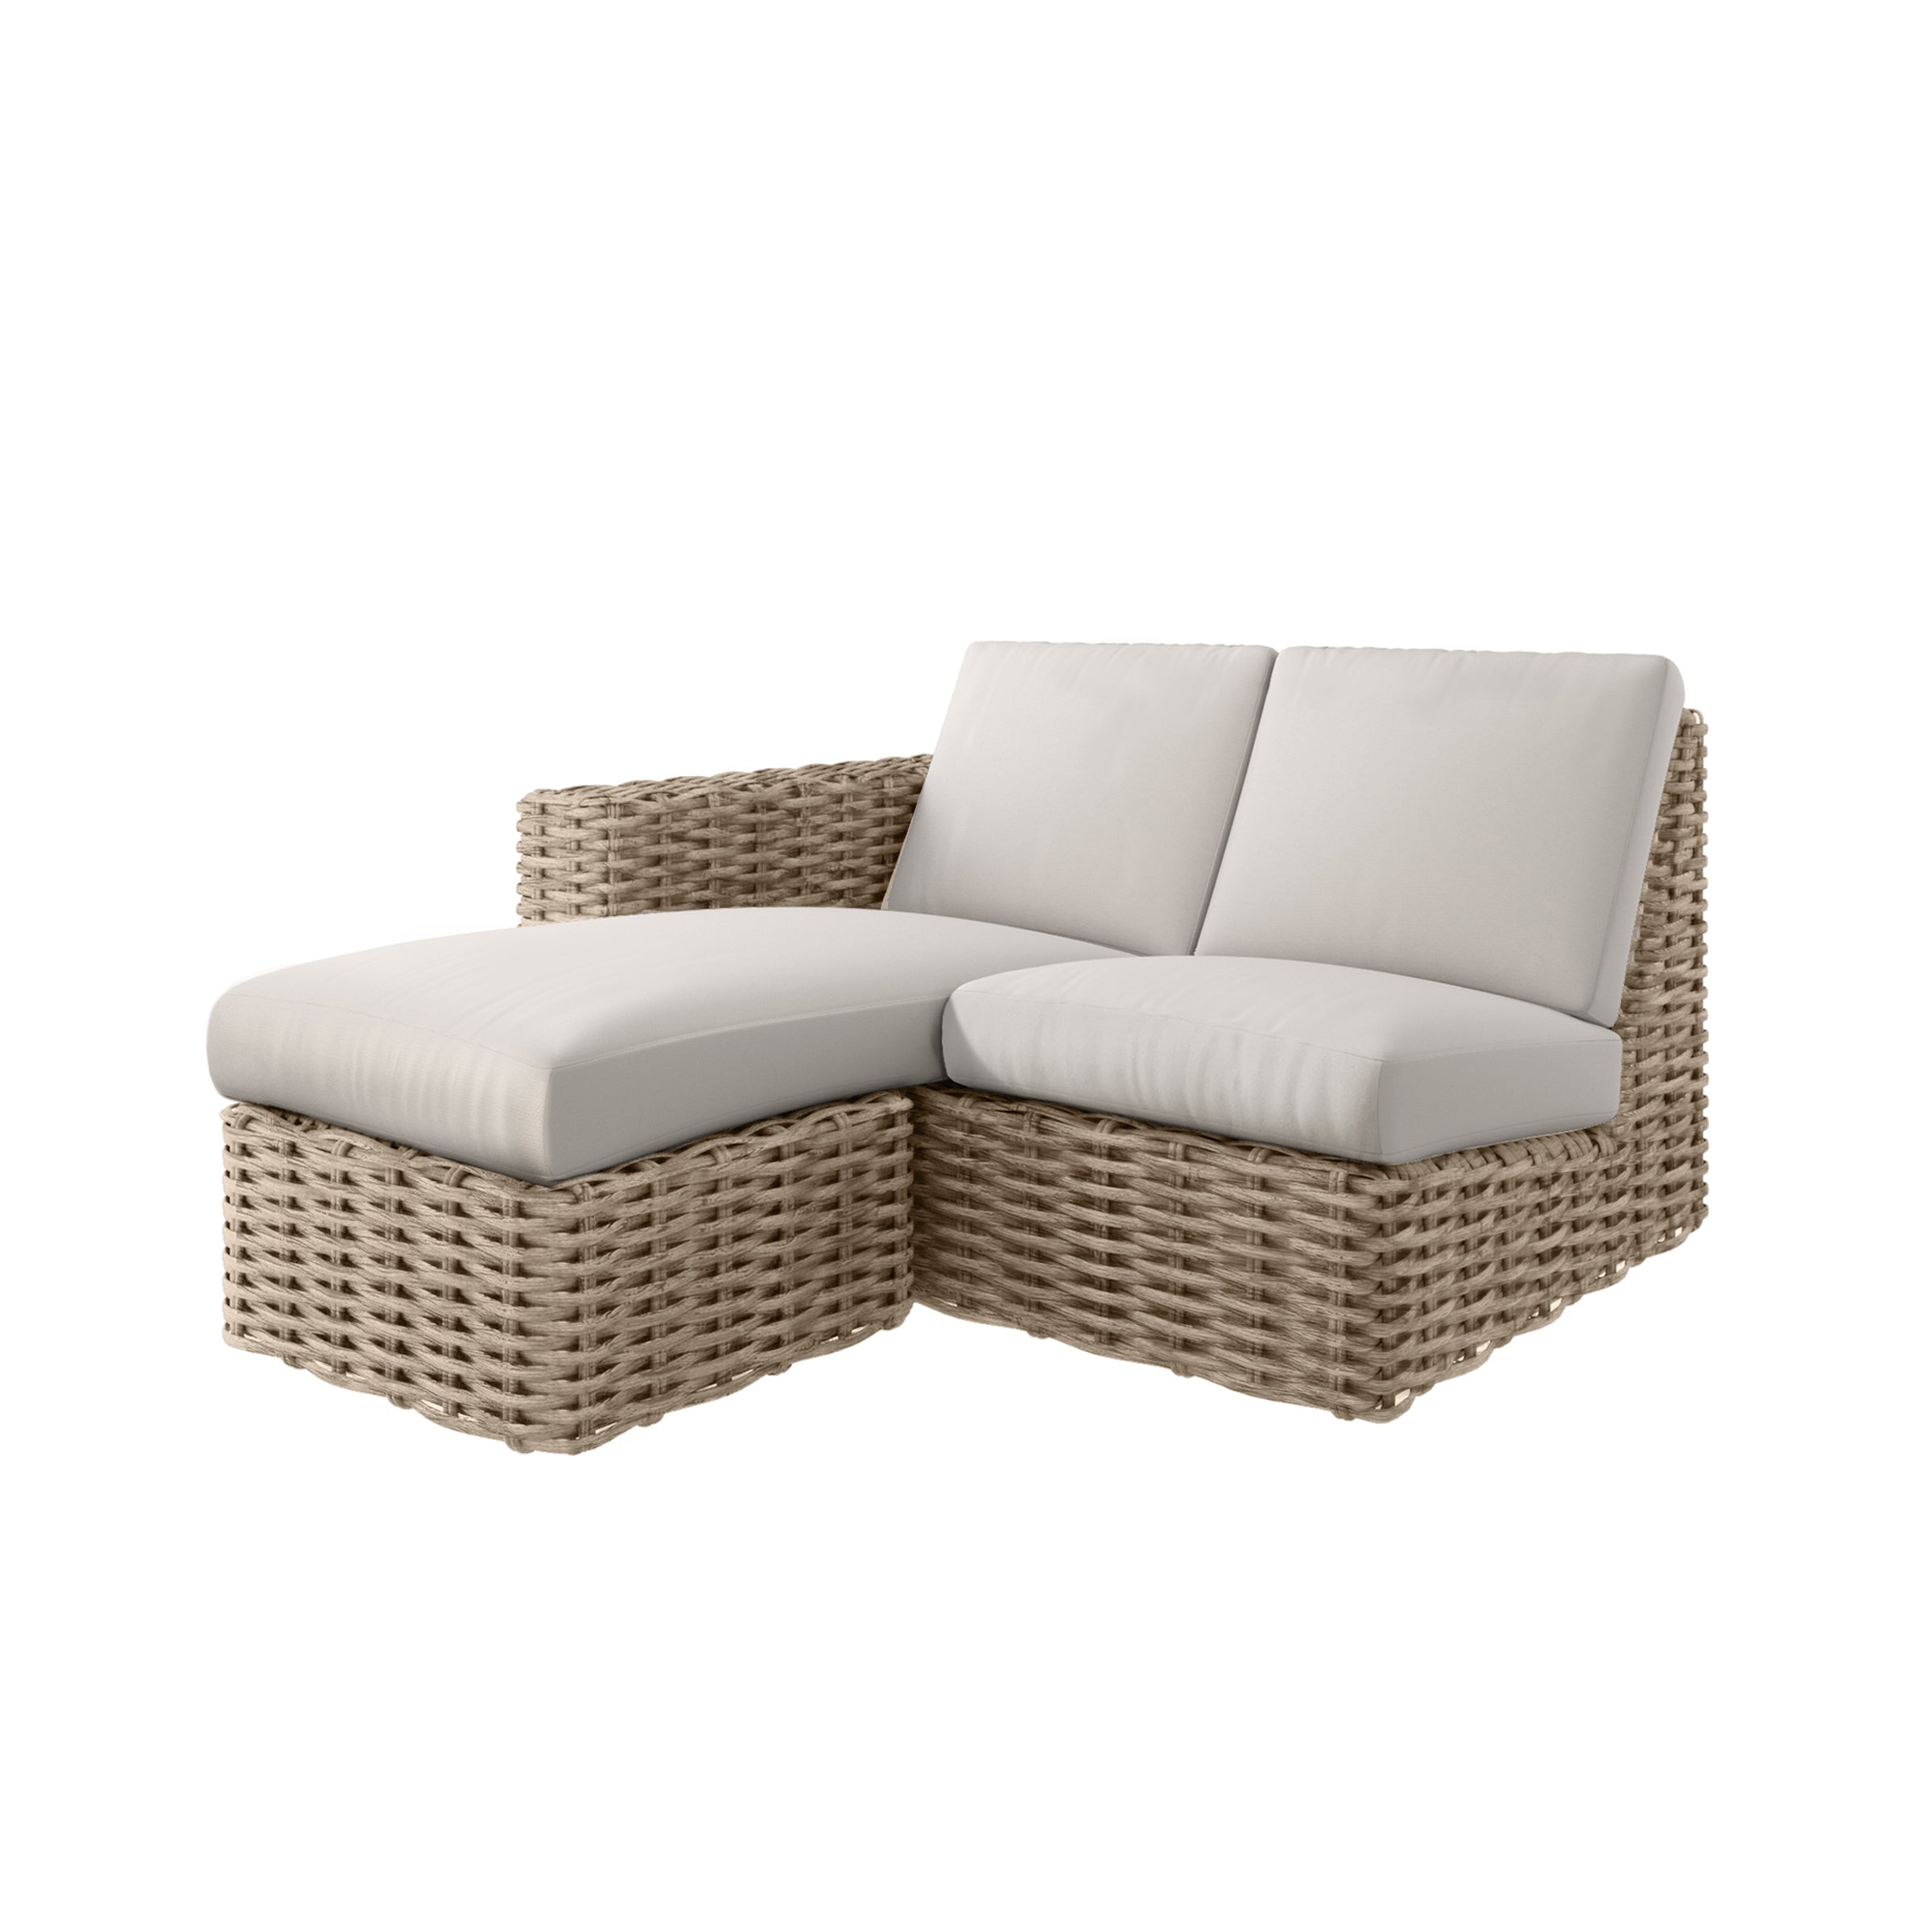 Mia Right Loveseat Section with Chaise Cushion